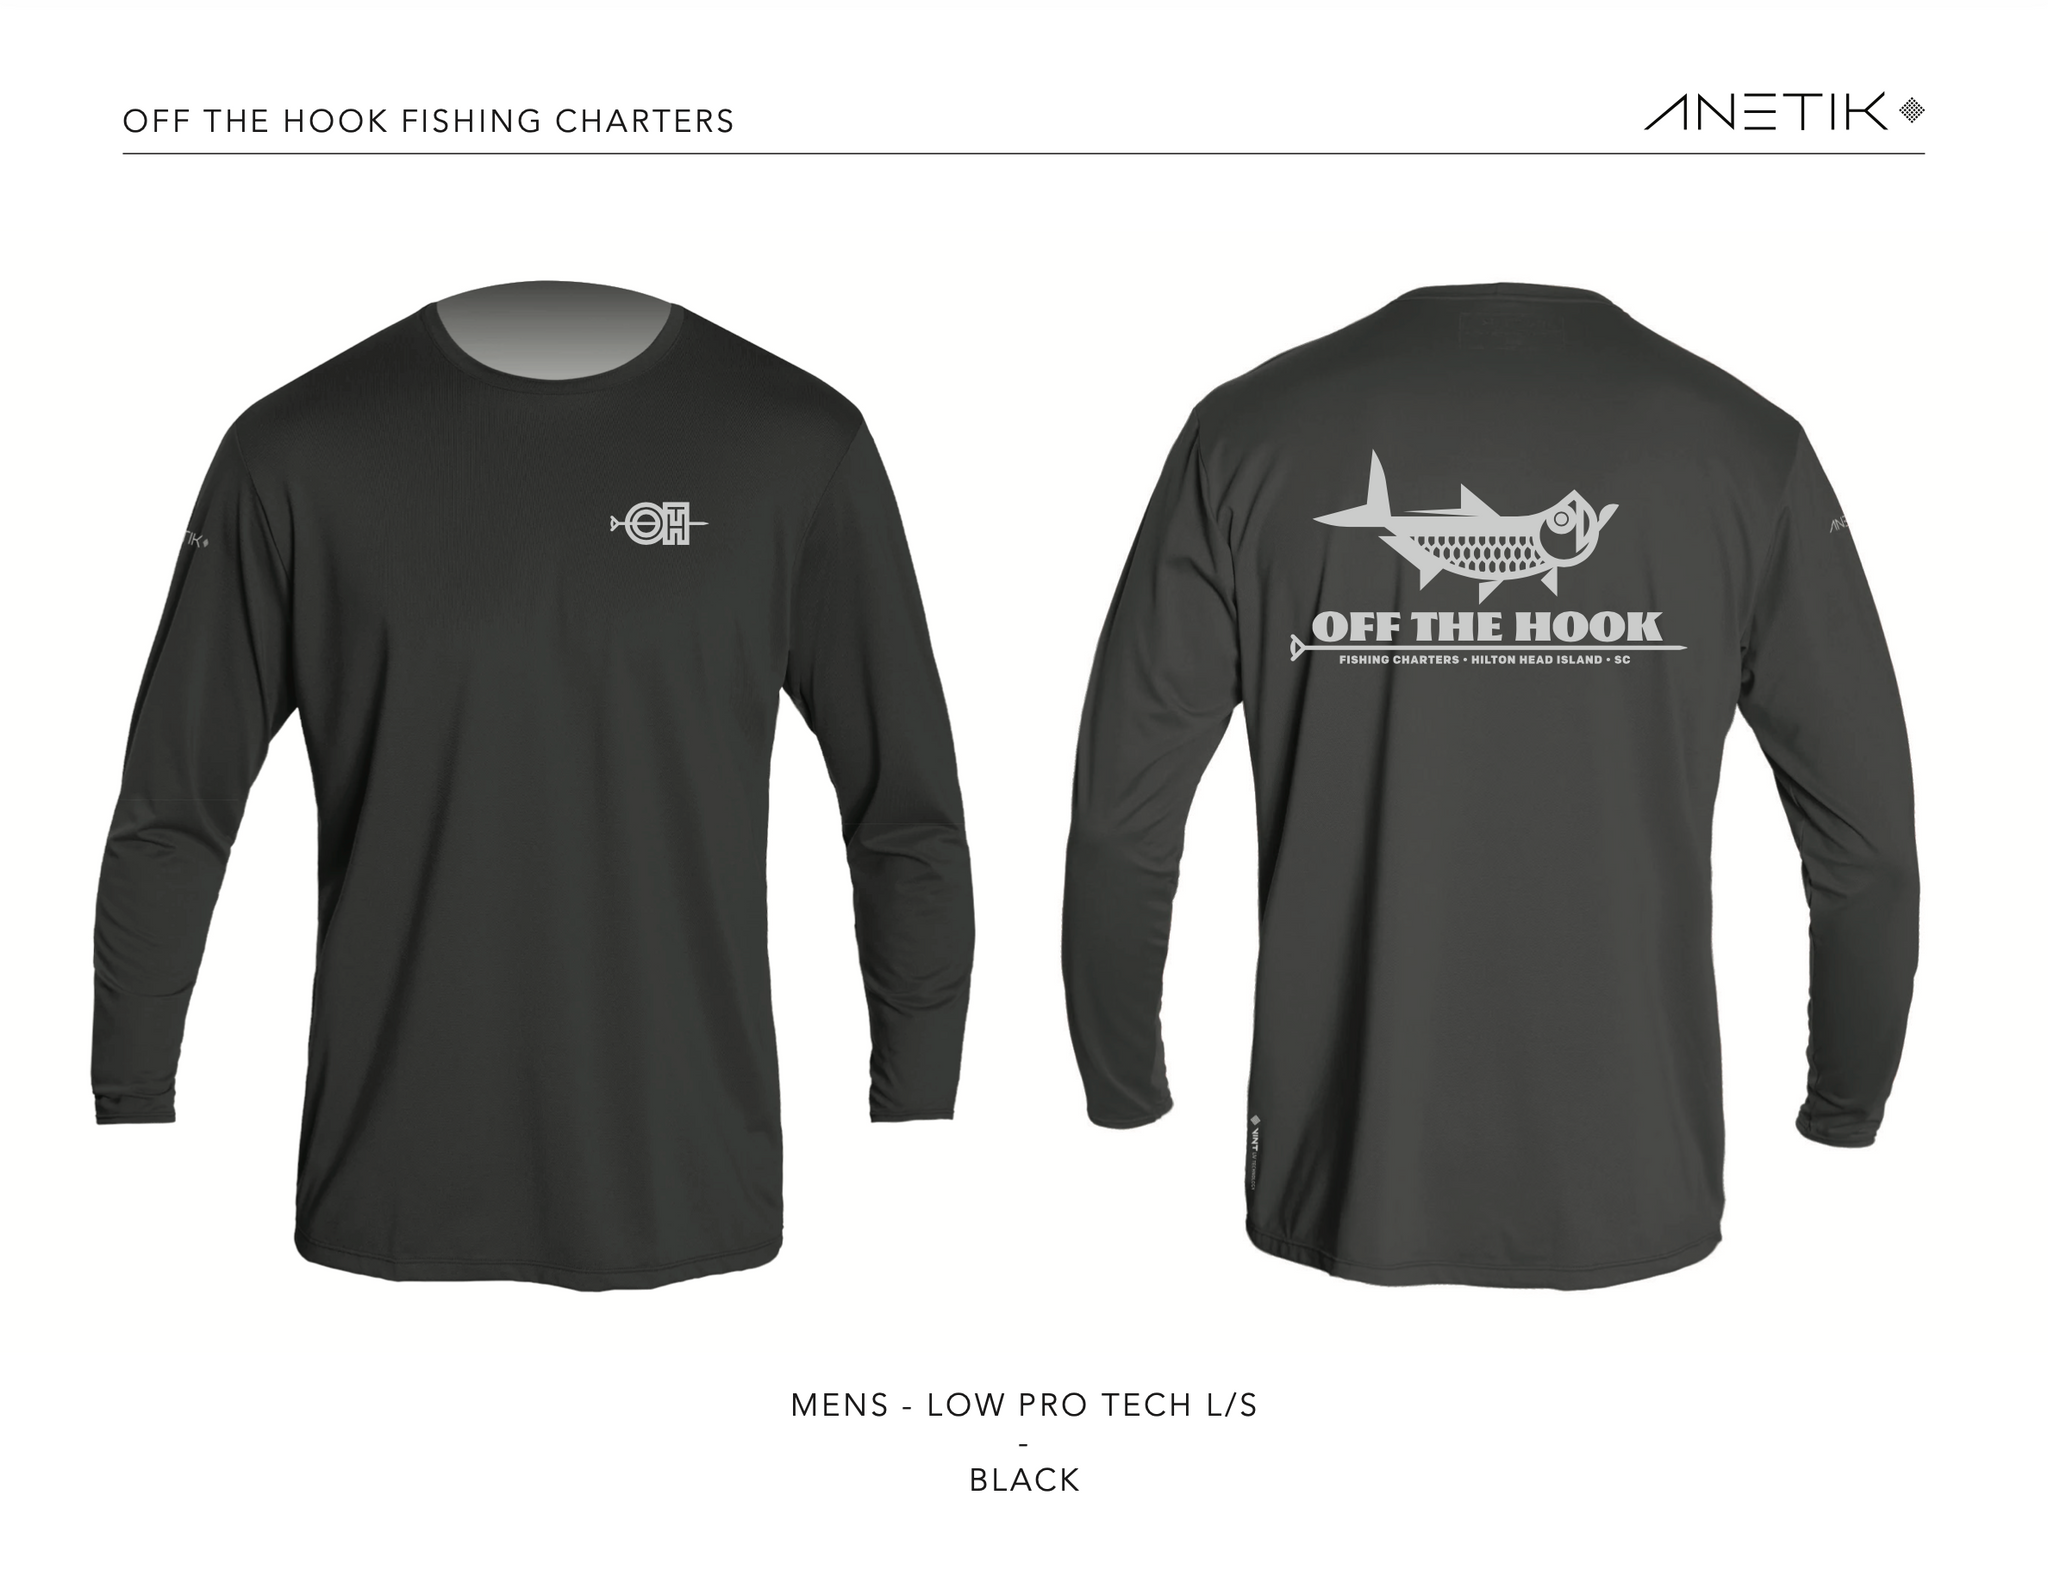 Hook and Stag Fishing shirt - $9 (64% Off Retail) - From emily